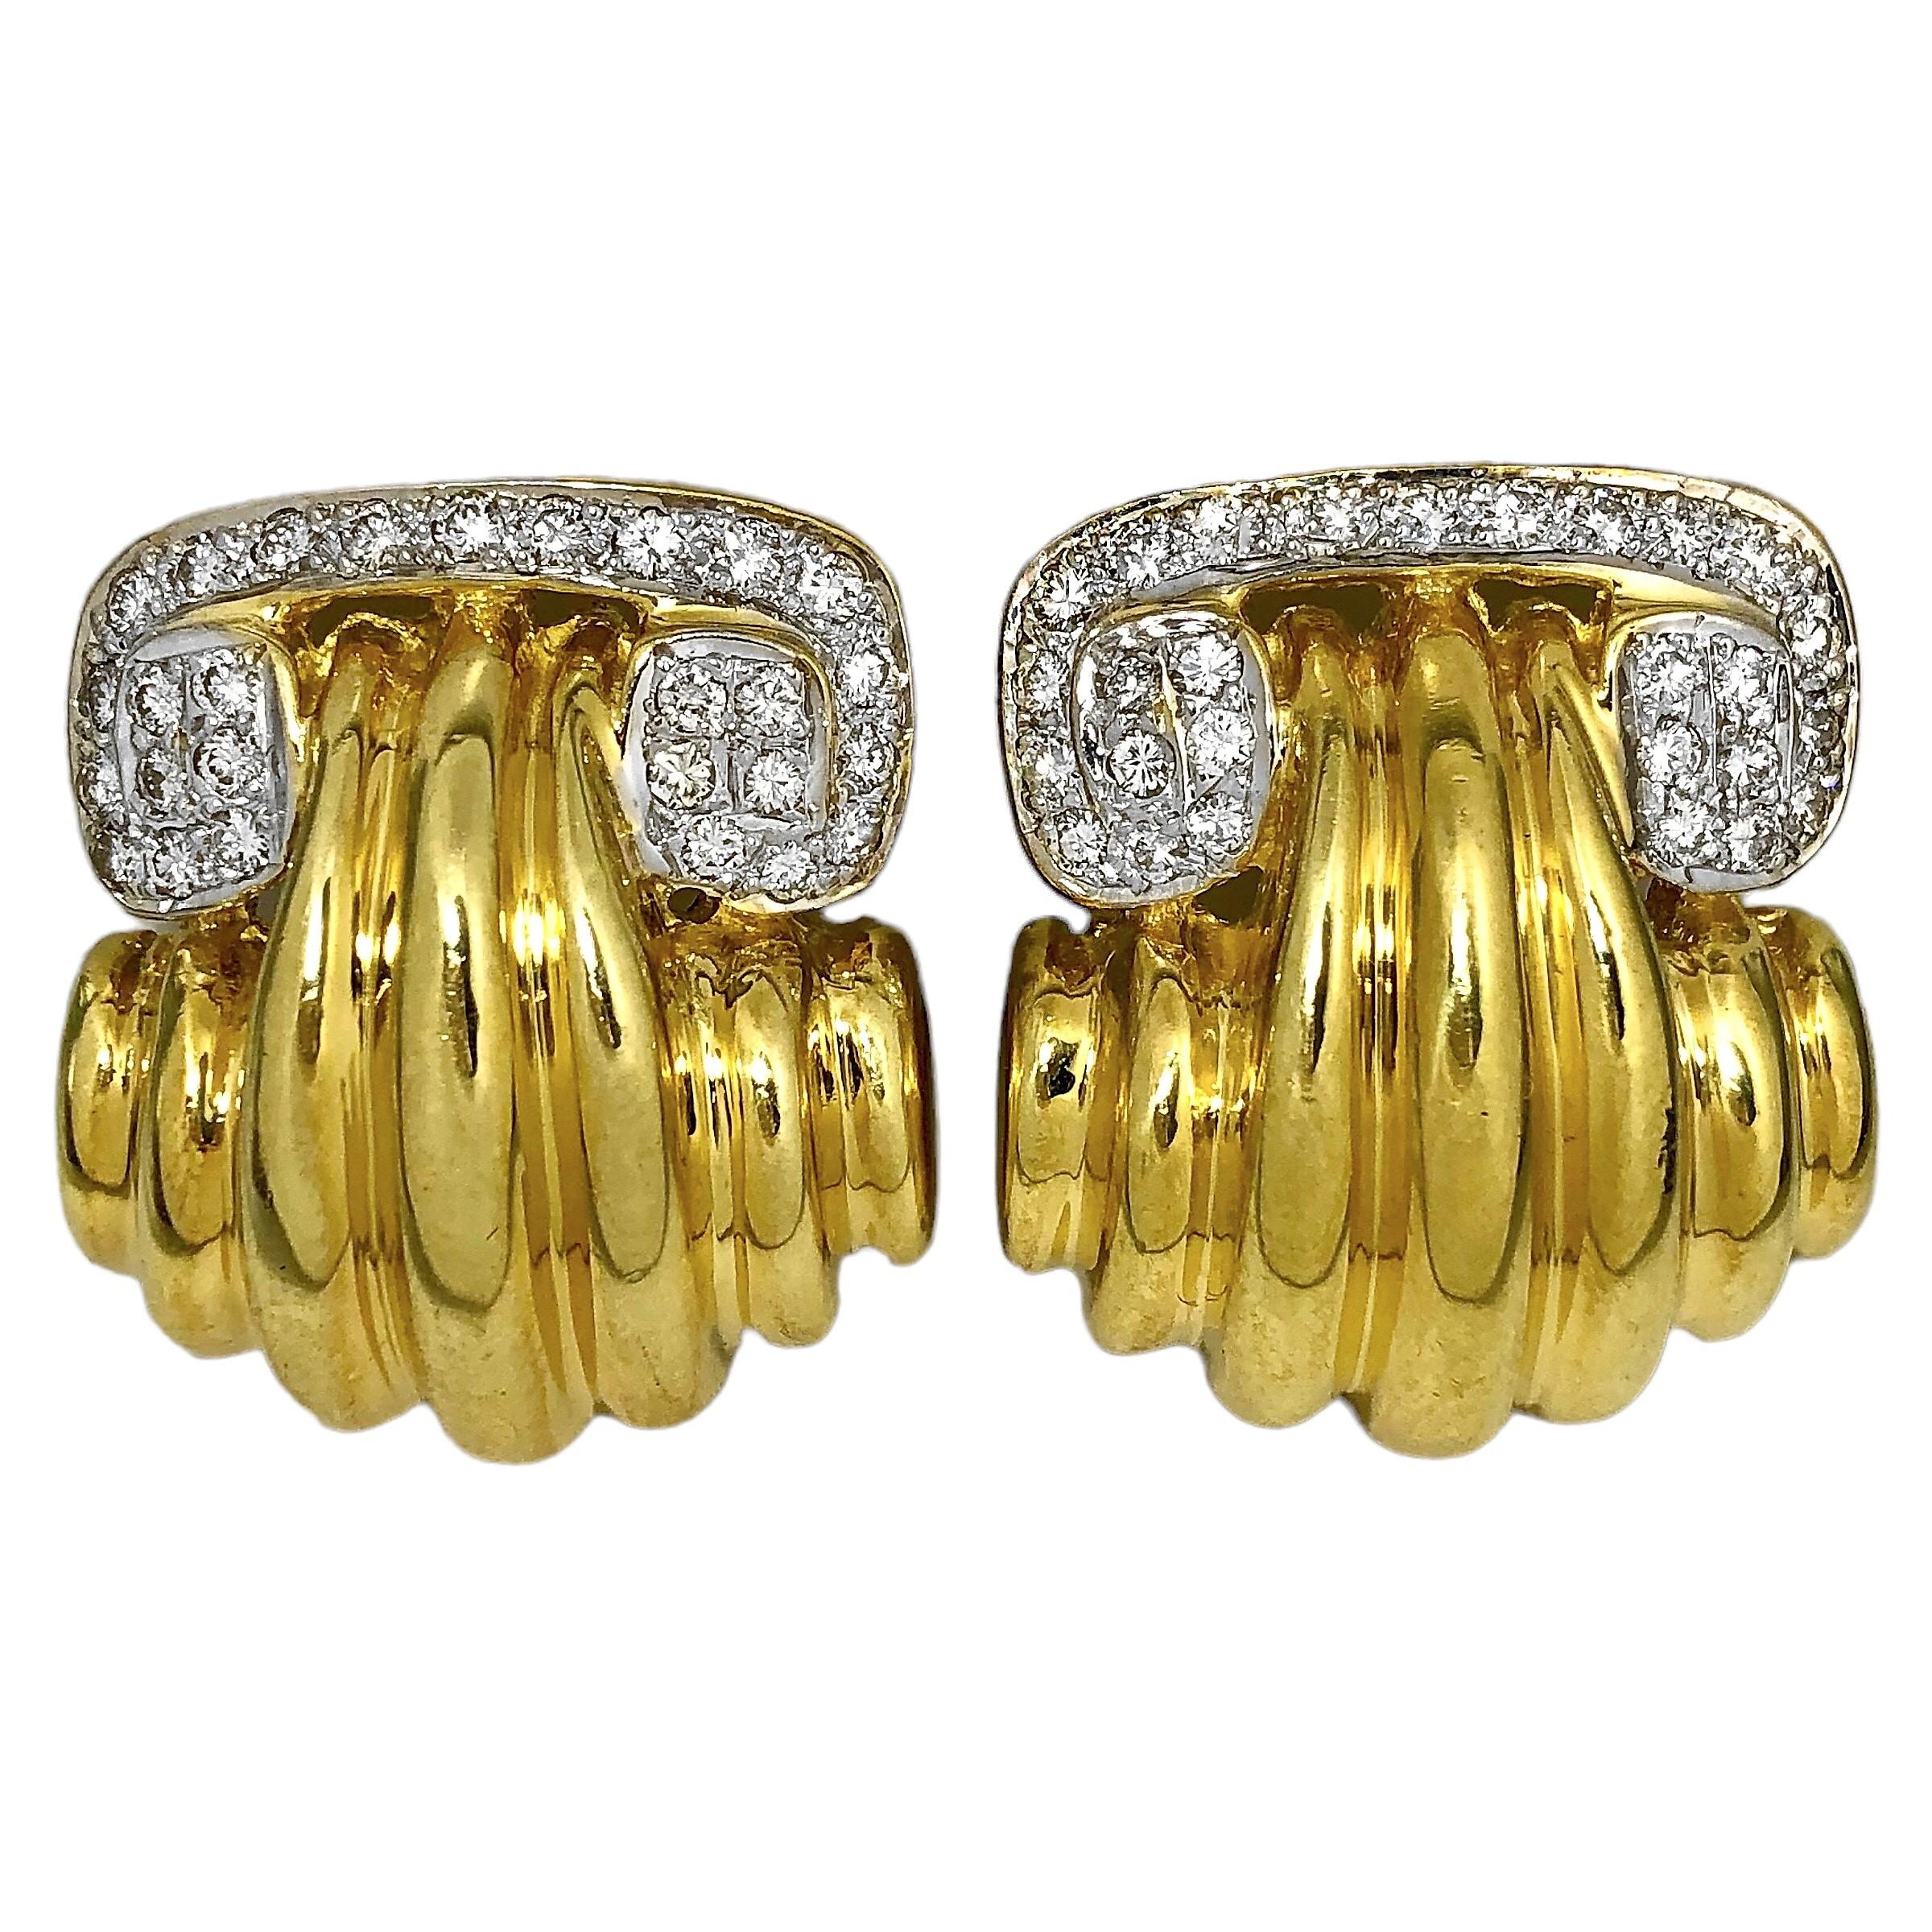 This striking pair of 18K yellow gold scroll top earrings are reminiscent of Ionic columns, in design. Set with sixty brilliant cut diamonds weighing an approximate 1.50ct total of overall G/H color and VS1 clarity.  Each earring is stamped 18K on